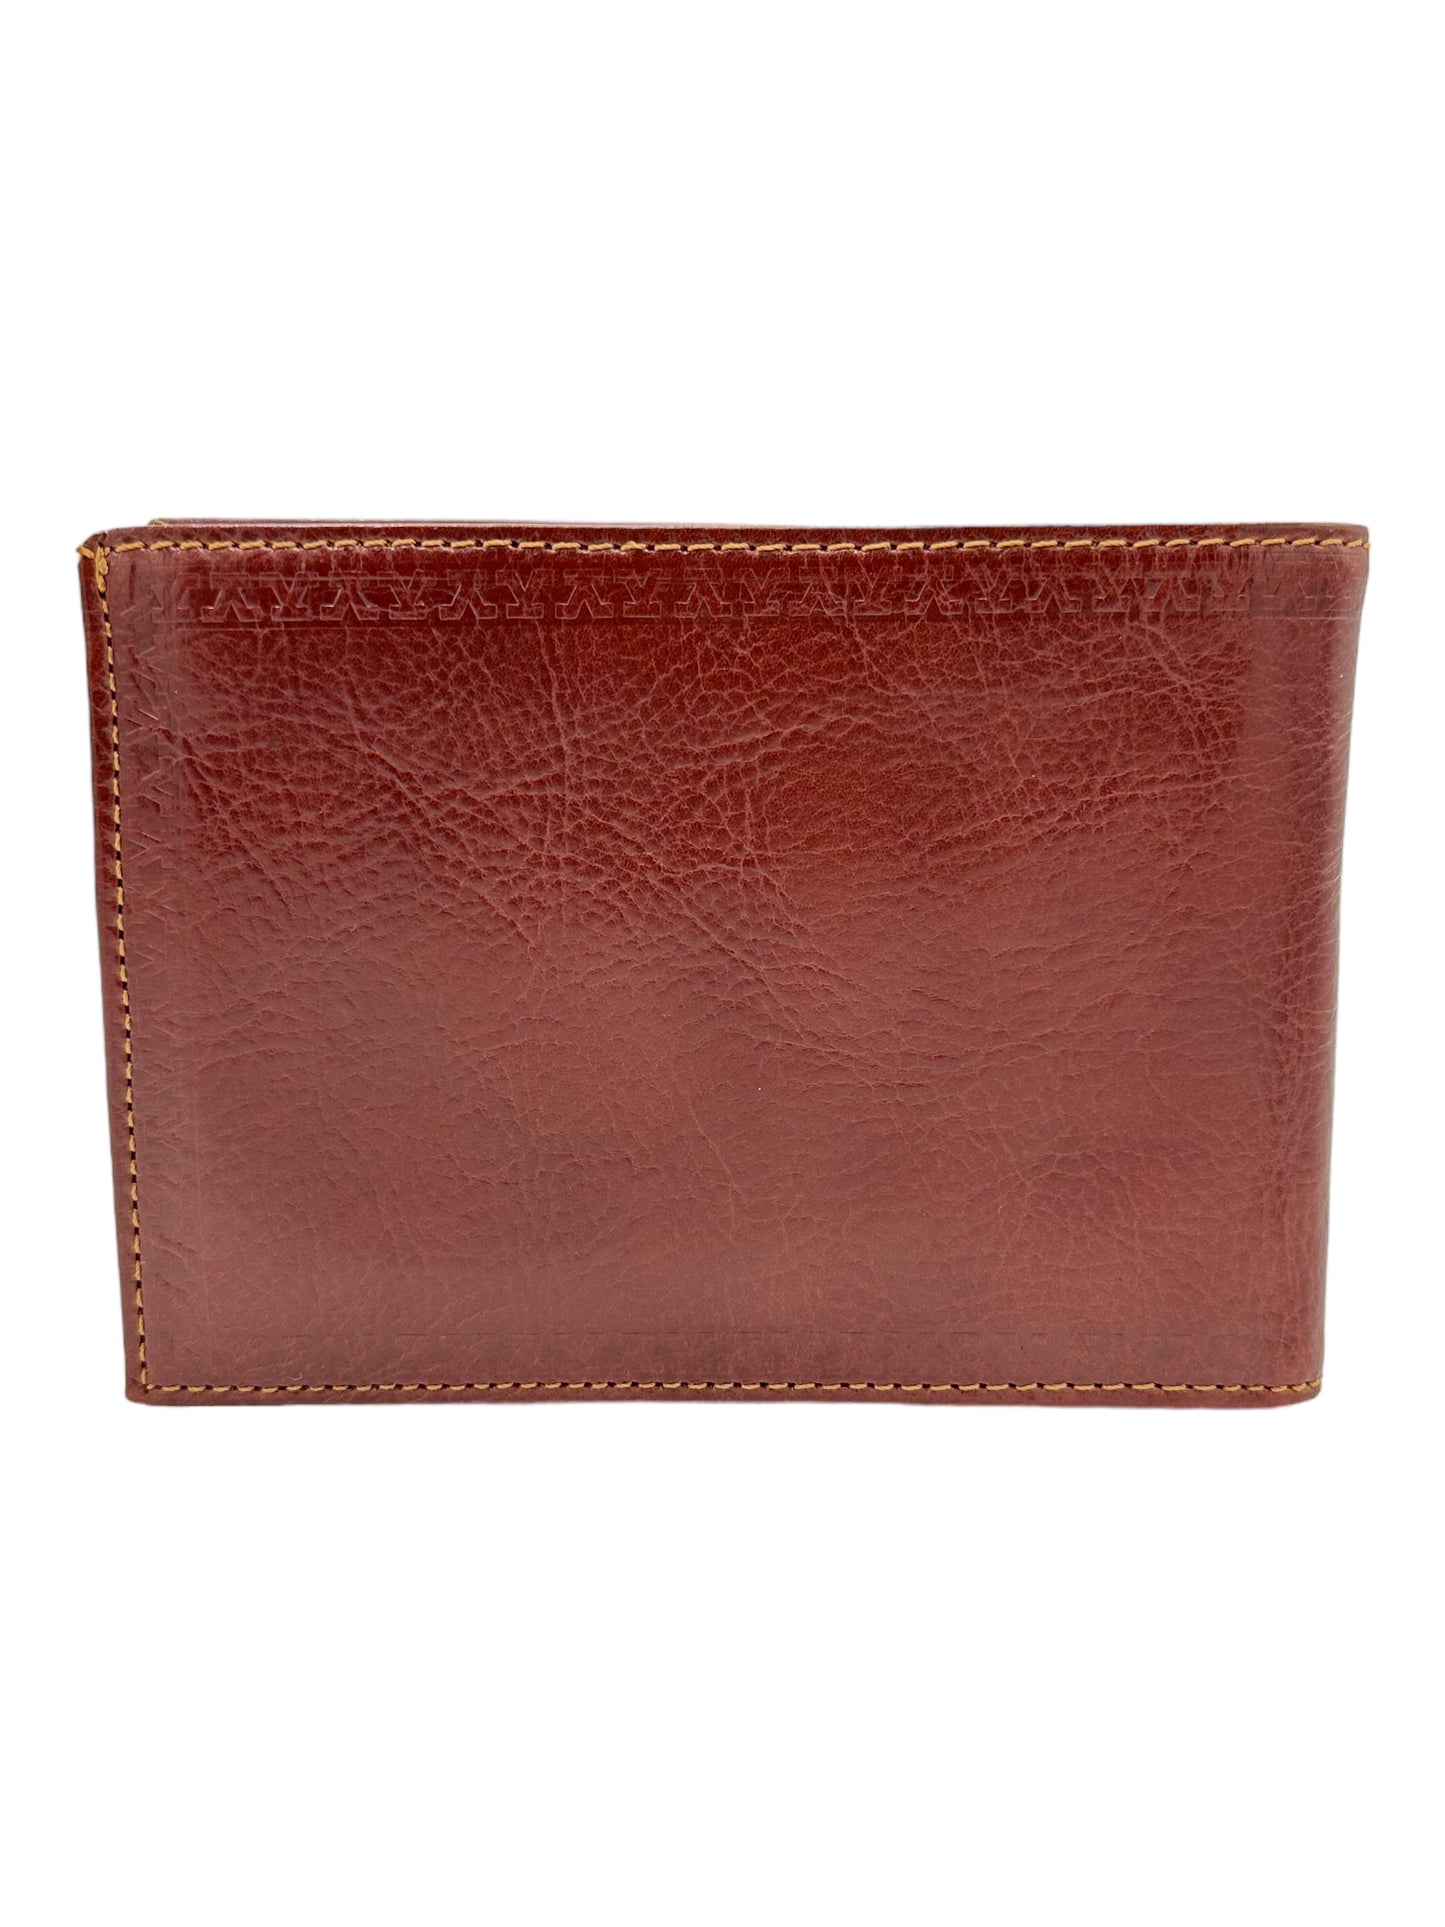 A Valentino Red Bi-fold Leather Wallet